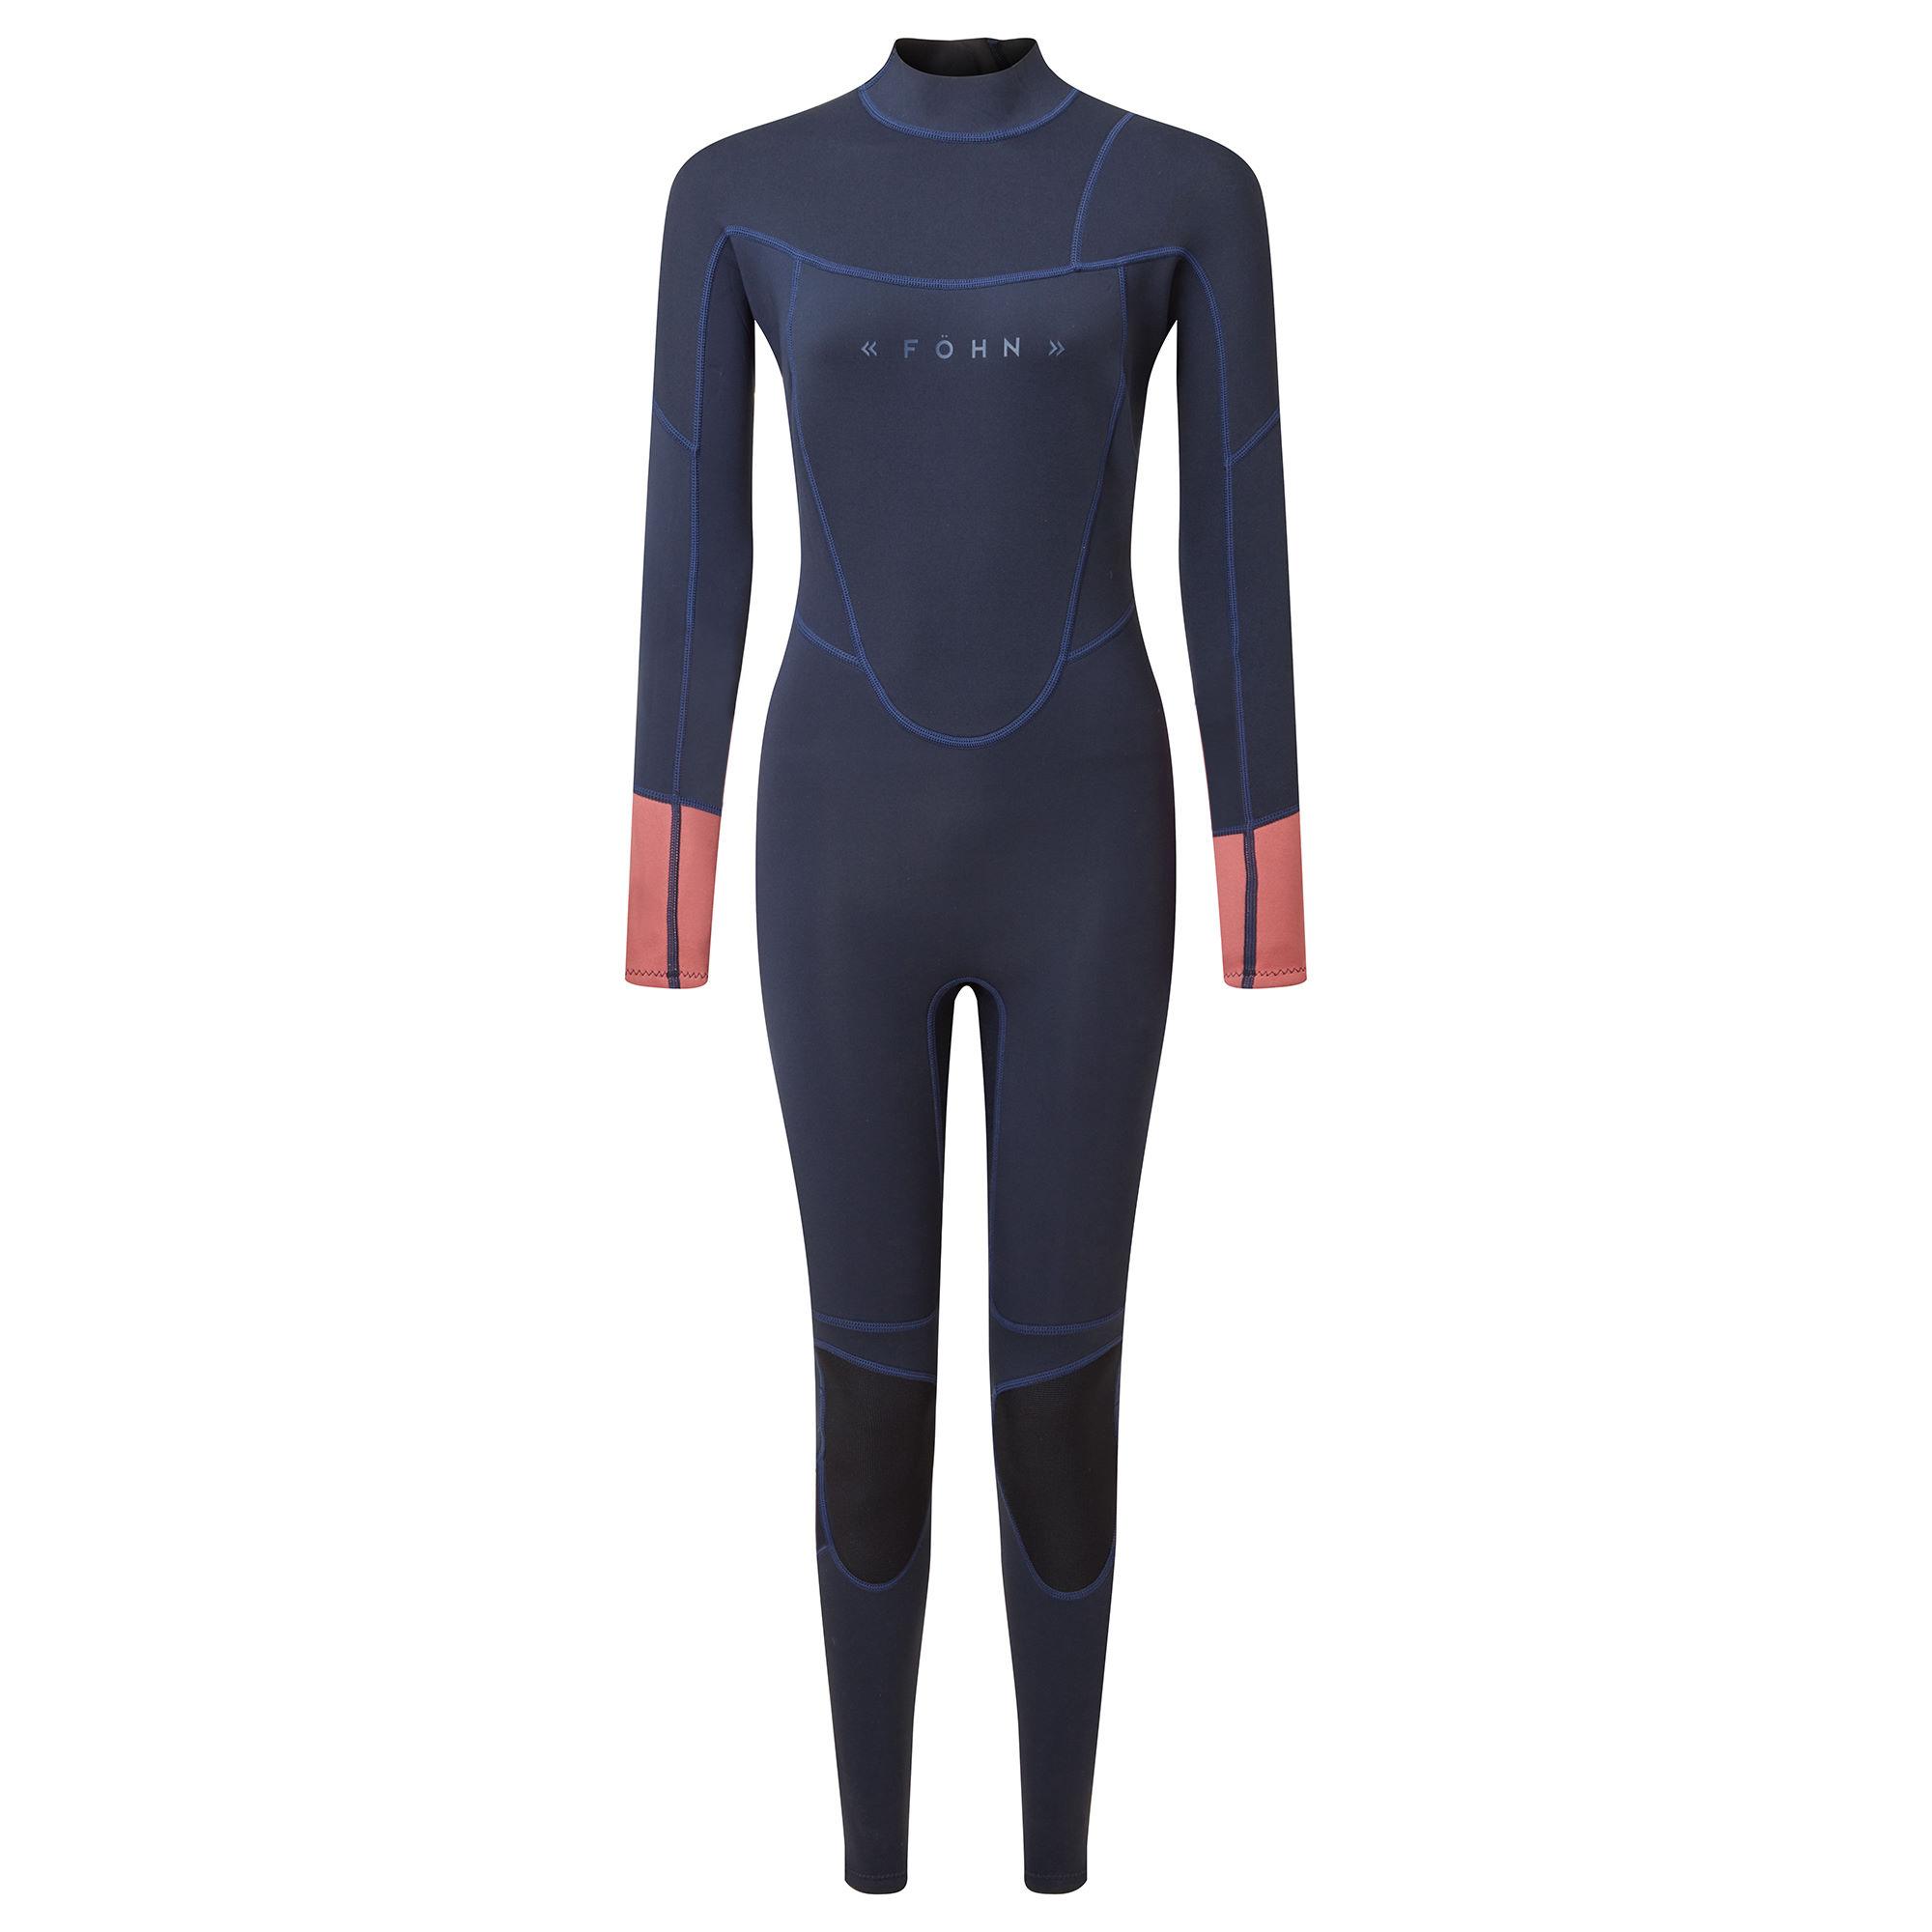 Fhn Womens 3/2mm Wetsuit - Navy